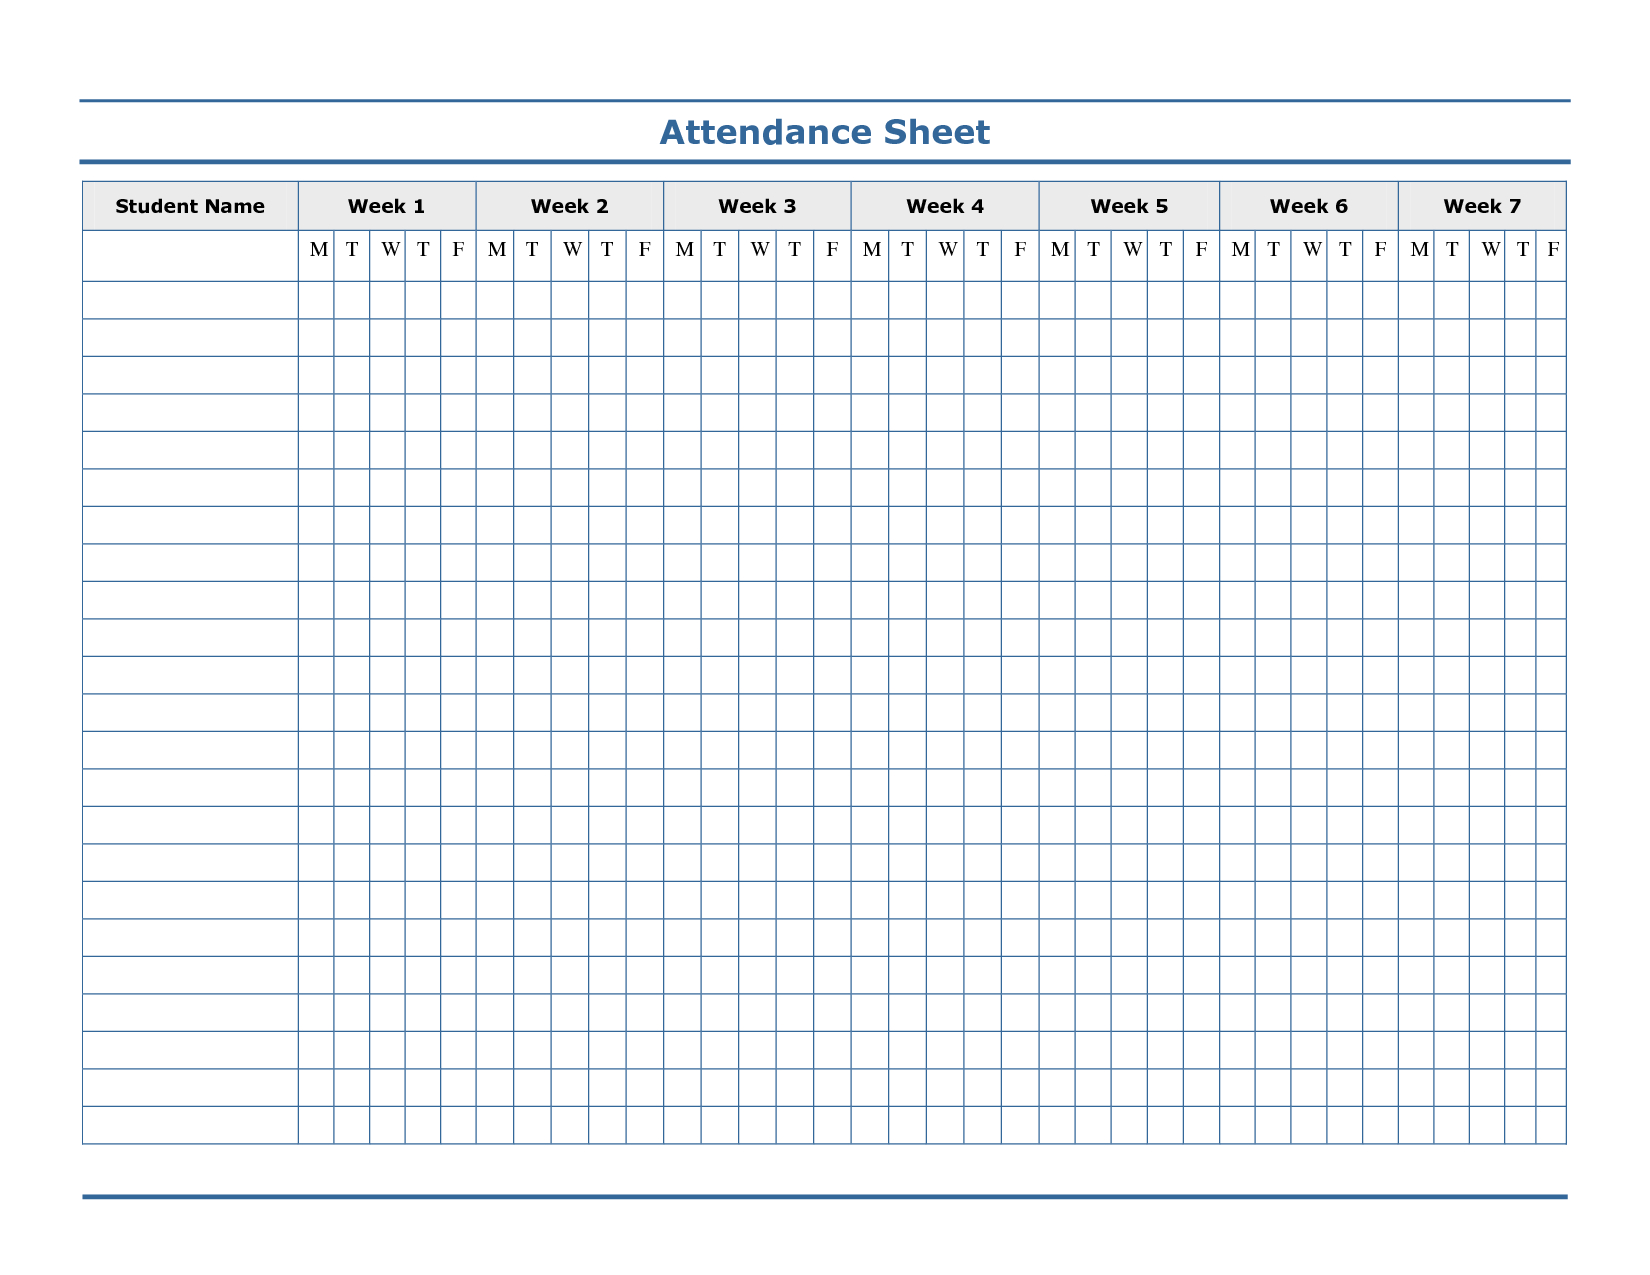 Free Printable Blank Attendance Sheets | Attendance Sheet - Free Printable Attendance Forms For Teachers